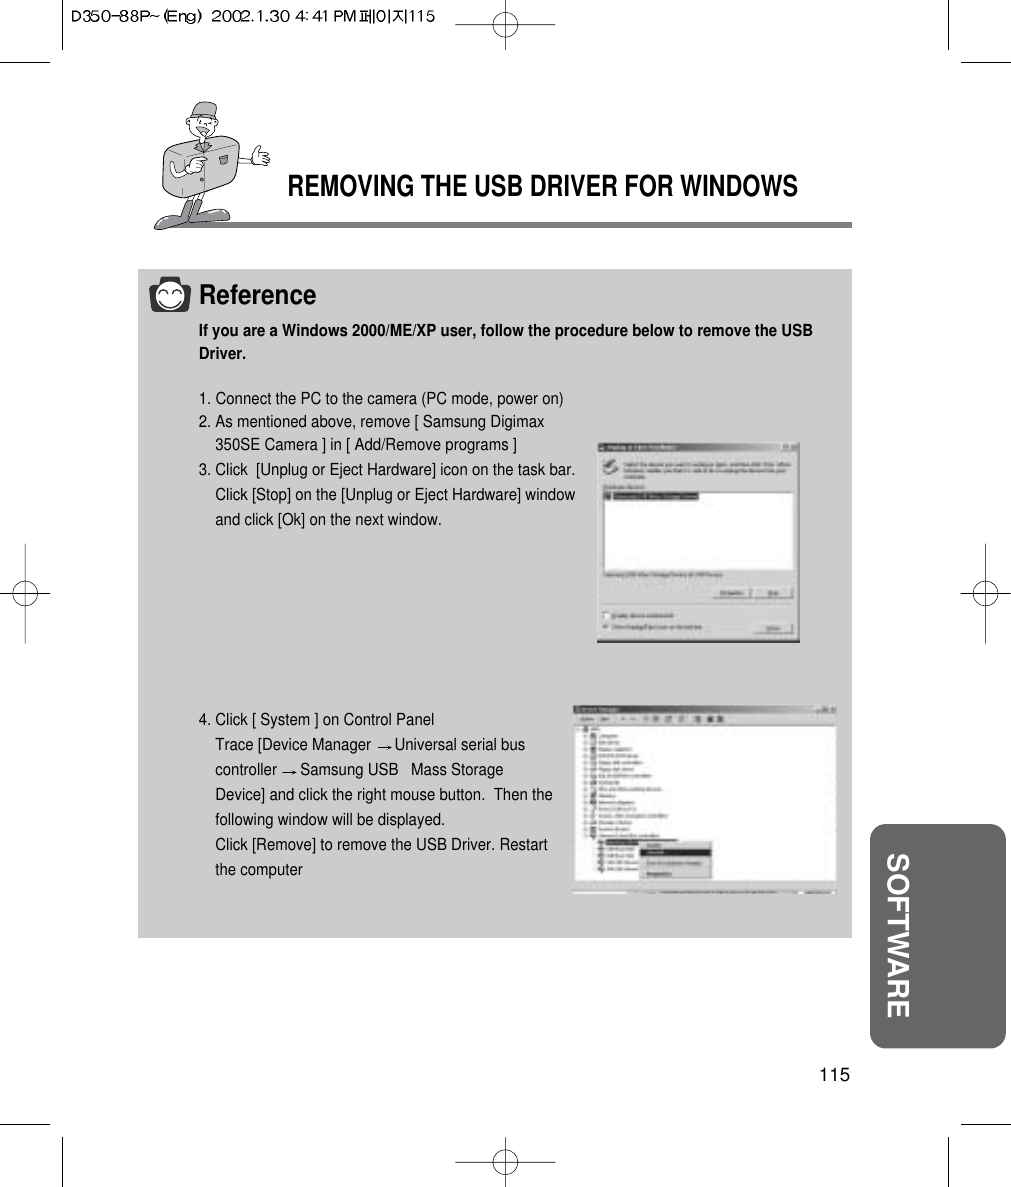 REMOVING THE USB DRIVER FOR WINDOWS115SOFTWAREReferenceIf you are a Windows 2000/ME/XP user, follow the procedure below to remove the USBDriver.1. Connect the PC to the camera (PC mode, power on)2. As mentioned above, remove [ Samsung Digimax350SE Camera ] in [ Add/Remove programs ]3. Click  [Unplug or Eject Hardware] icon on the task bar.Click [Stop] on the [Unplug or Eject Hardware] windowand click [Ok] on the next window.4. Click [ System ] on Control PanelTrace [Device Manager  Universal serial buscontroller  Samsung USB   Mass StorageDevice] and click the right mouse button.  Then thefollowing window will be displayed.Click [Remove] to remove the USB Driver. Restartthe computer